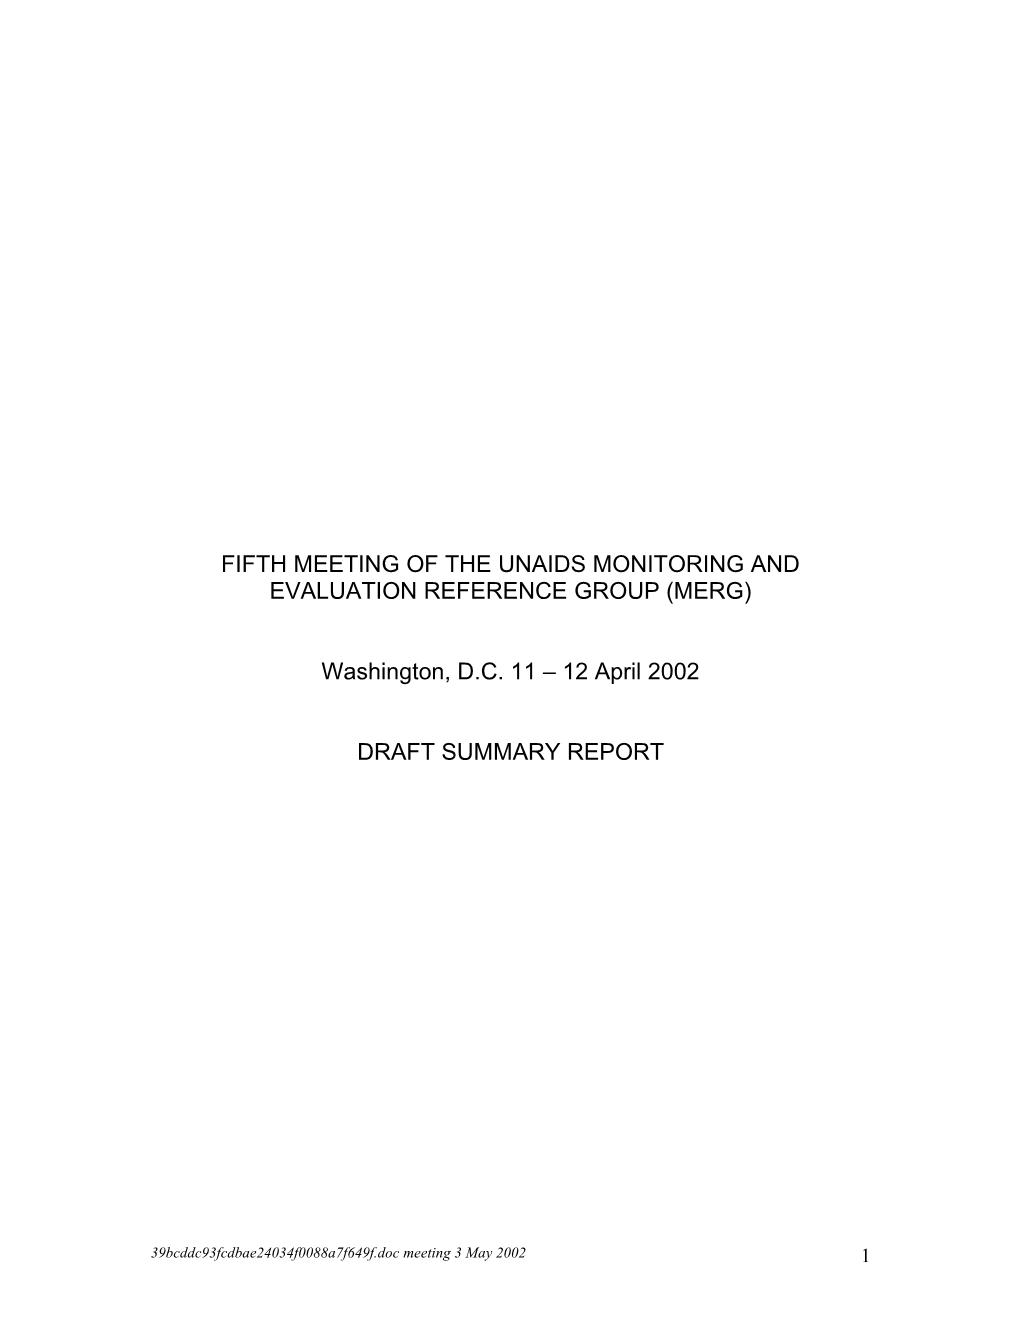 Fifth Meeting of the UNAIDS Monitoring and Evaluation Reference Group (MERG) : Washington